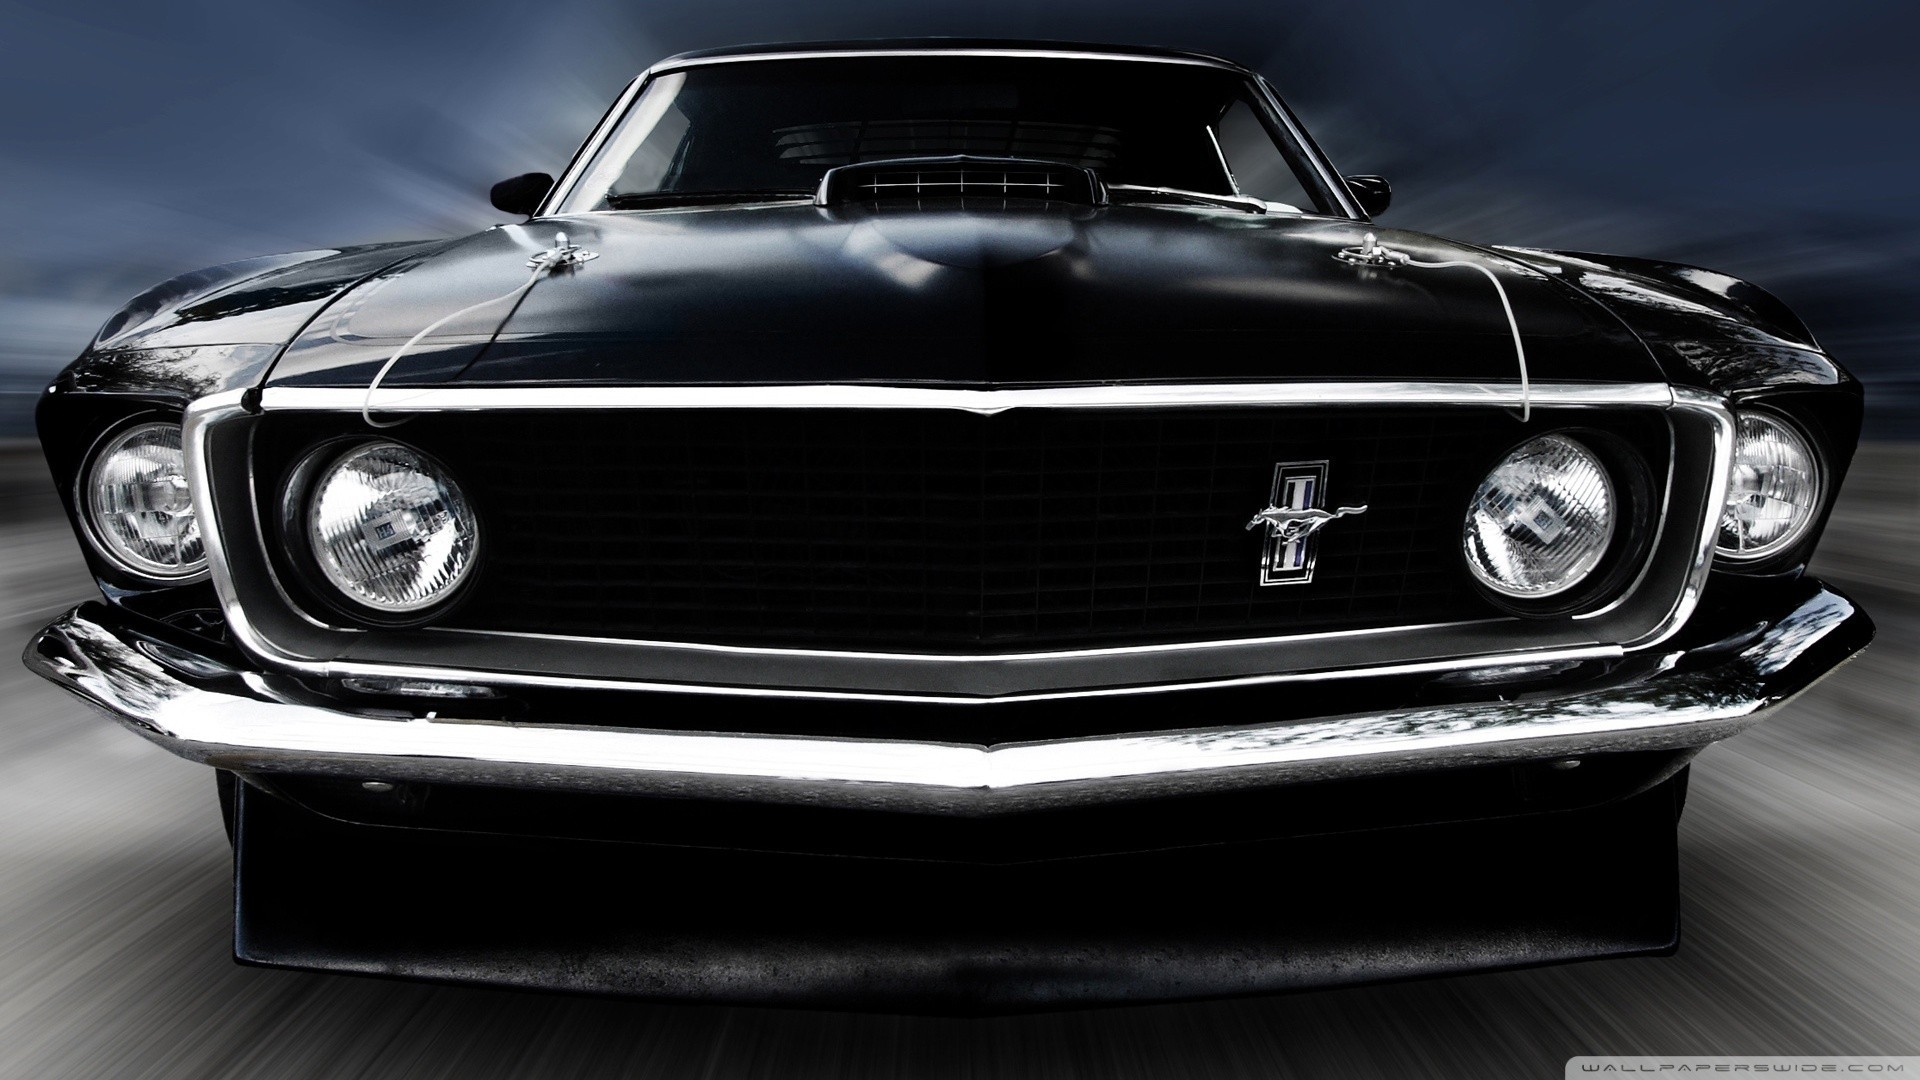 Muscle Cars in 1920x1080 Wallpapers (65+ images) Muscle Car Wallpaper 1920x1080